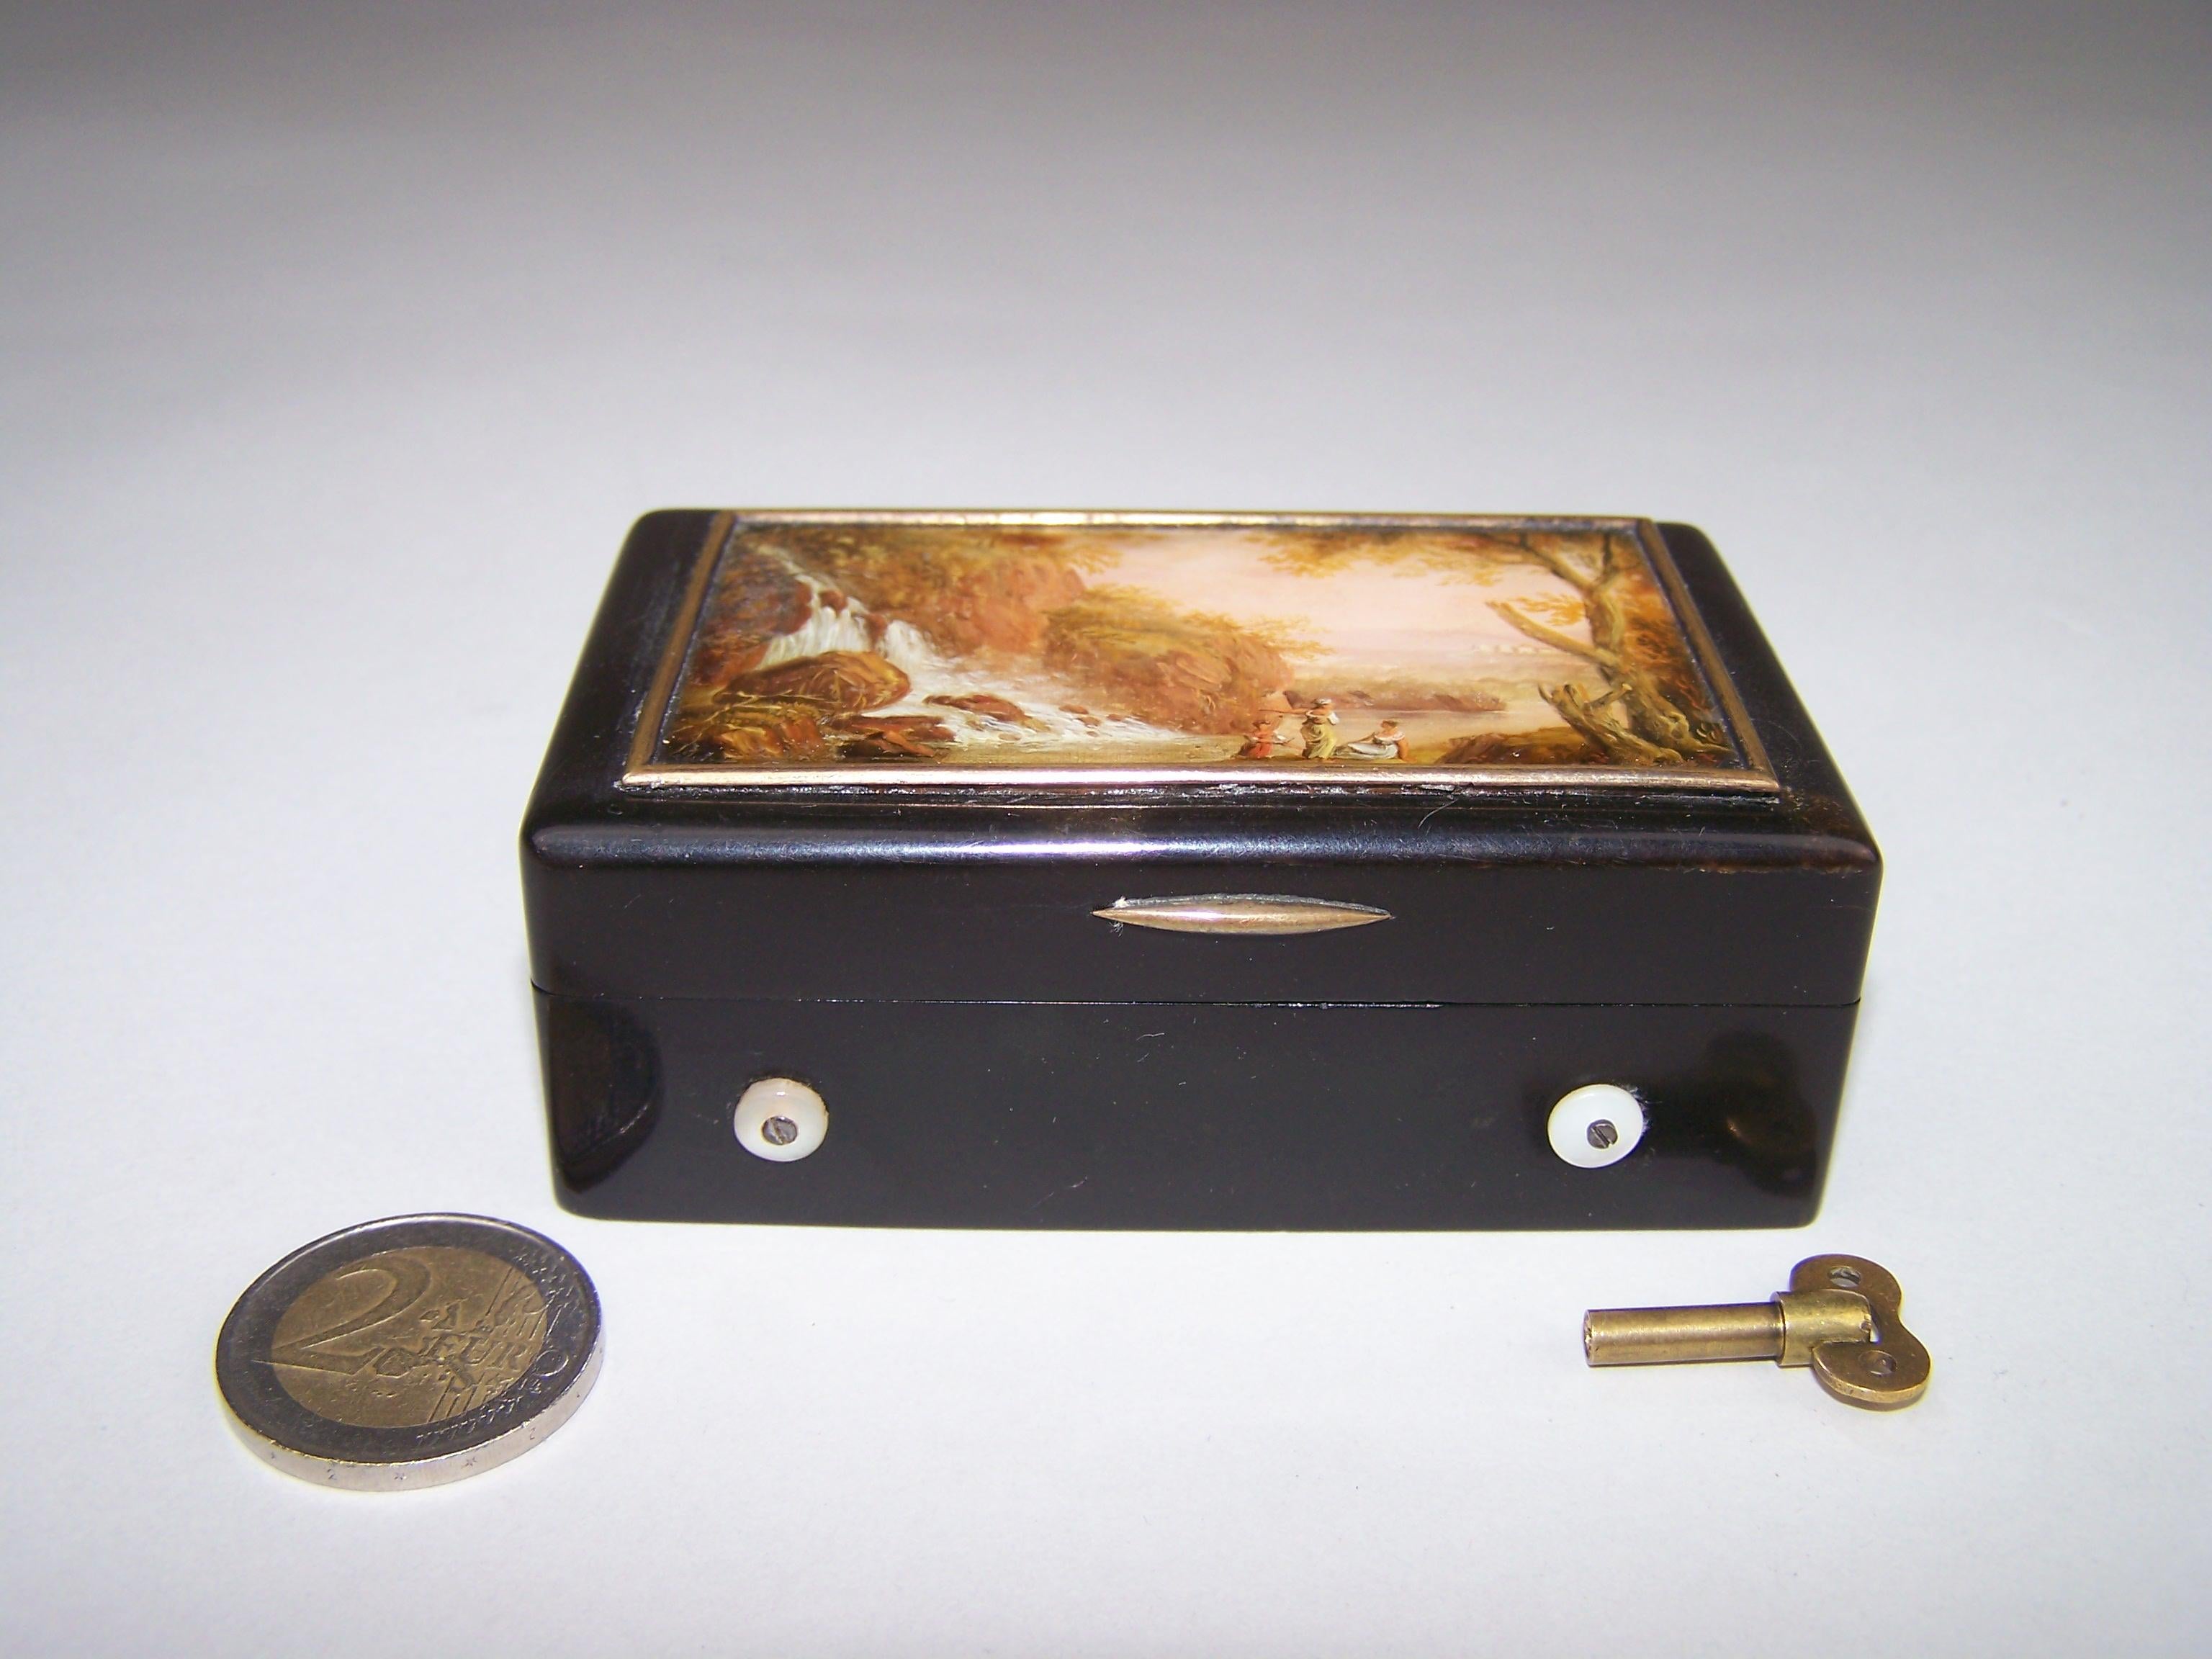 Music box made in Switzerland in the mid-19th century.

This rare snuffbox plays 2 melodies, on a comb made of several small parts. (Until the mid-19th century, it was not yet possible to make a comb from 1 part).

The box is made of pressed horn